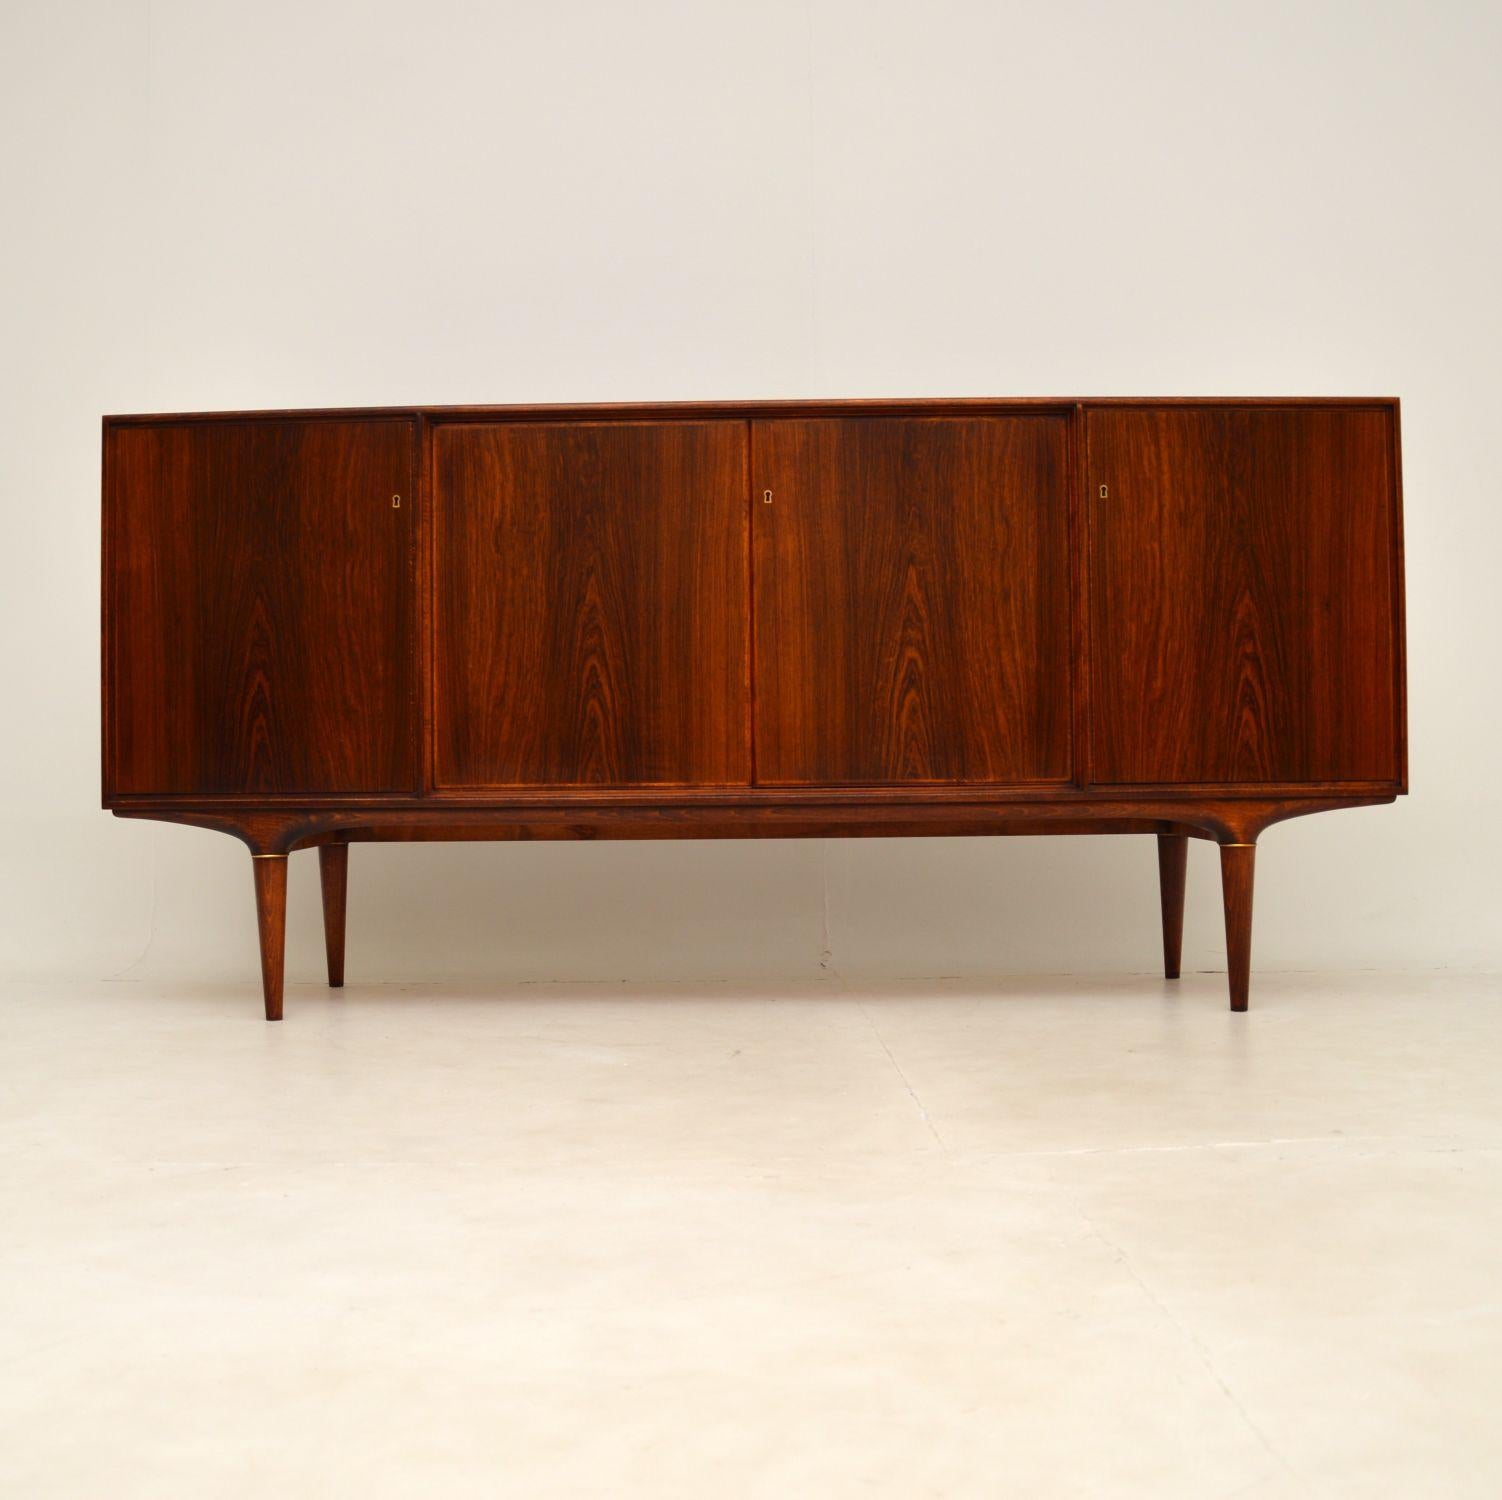 A stunning and rare vintage Swedish sideboard, this model is called the Cortina. It was designed by Svante Skogh, and was made in Seffle in Sweden, it dates from the 1960’s.

This is of absolutely superb quality, and has lots of great features.